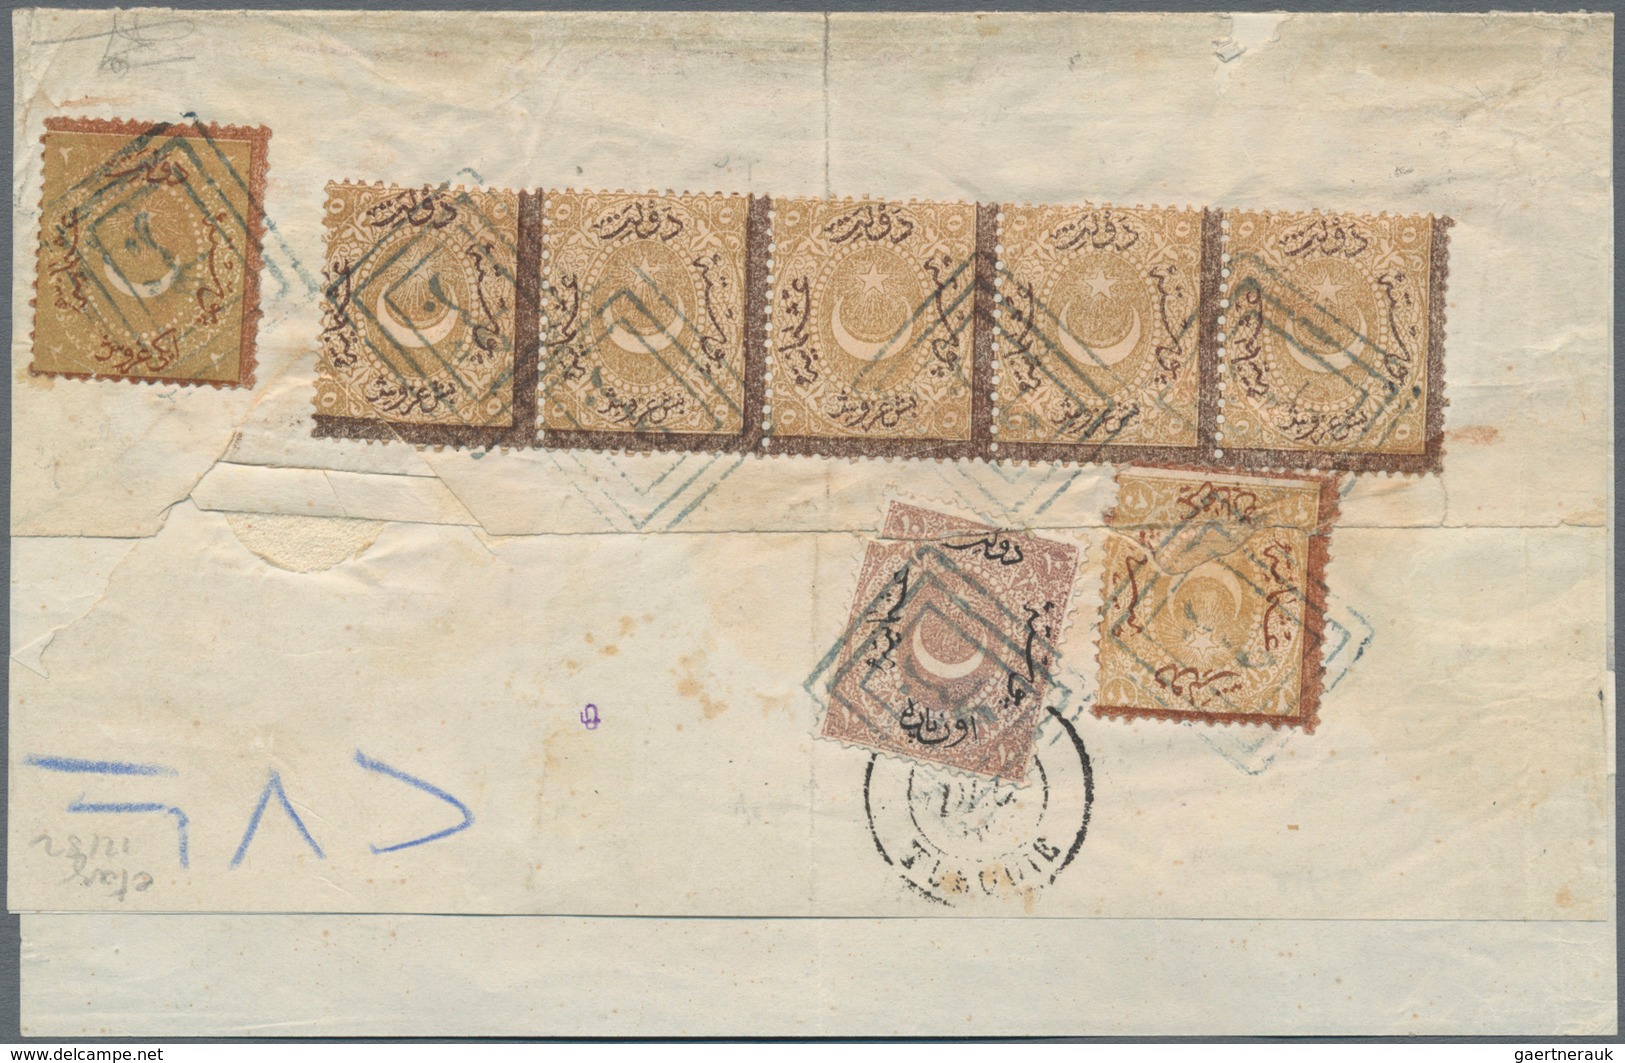 Syrien: 1869: Folded Cover From Marseilles To Alep, SYRIA Franked By Six Singles Of Napoleon 1868 80 - Syrien